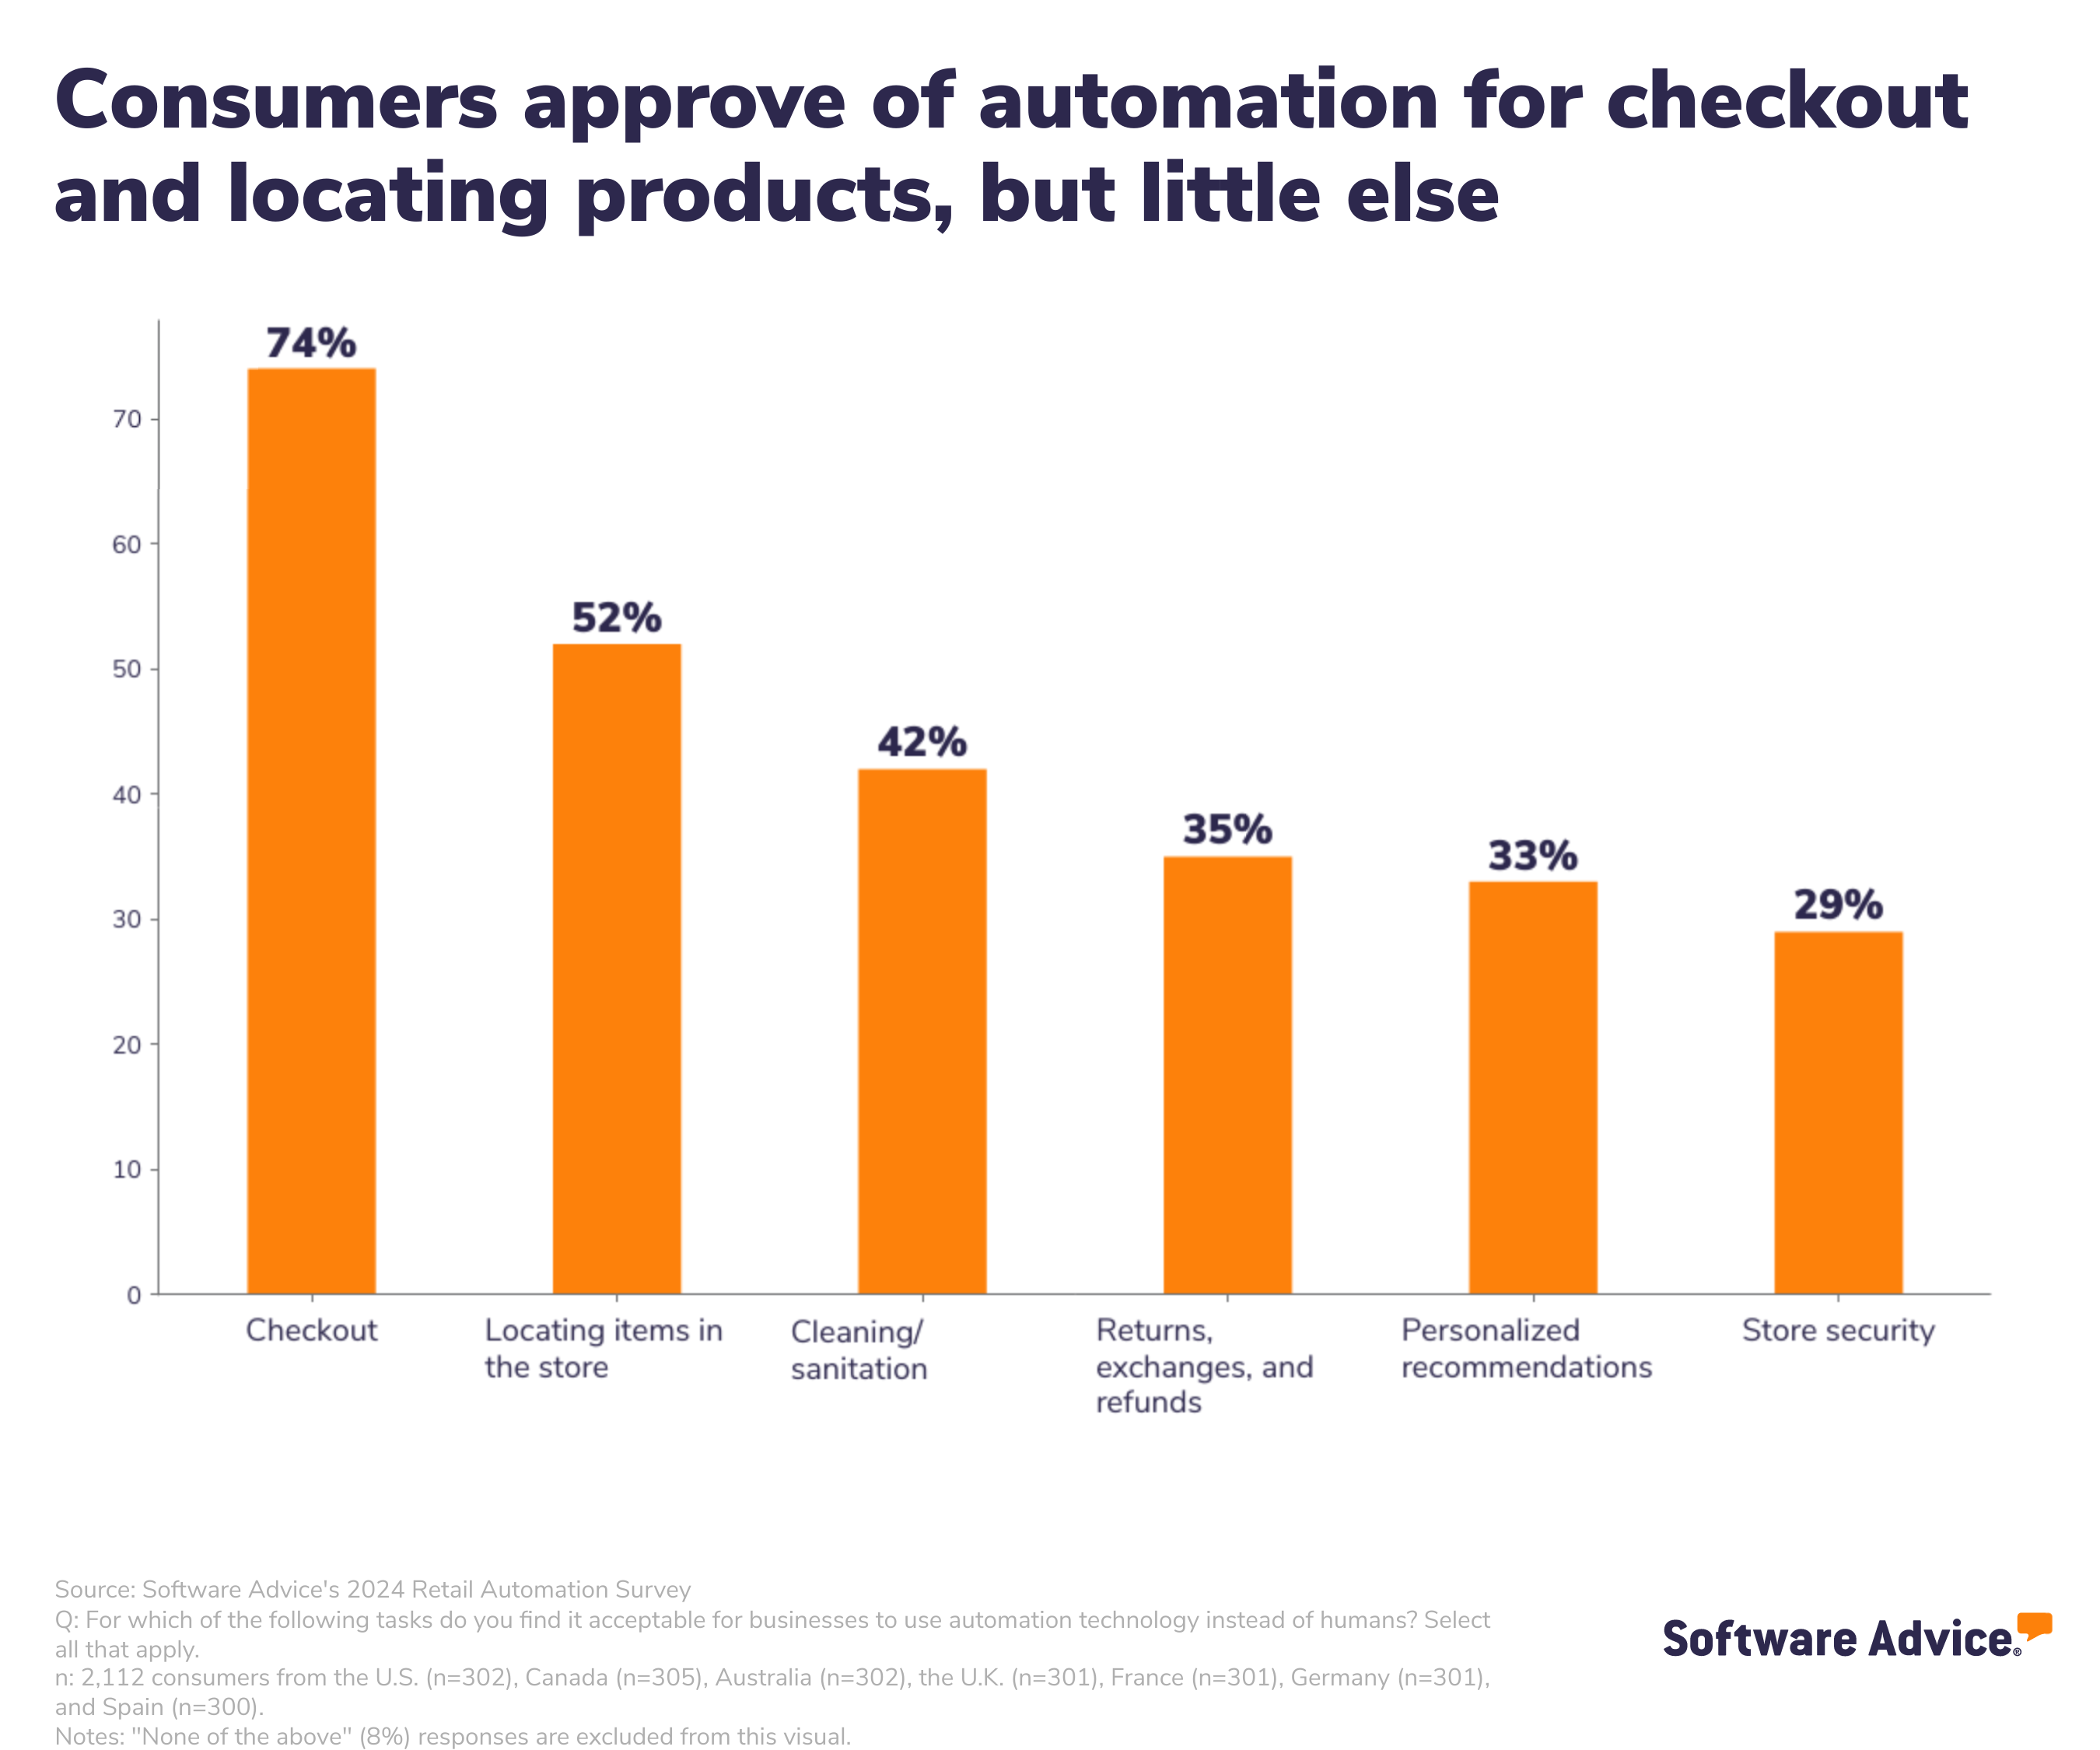 Chart showing that consumers generally approve of automated checkout, but disapprove of automated store security. 